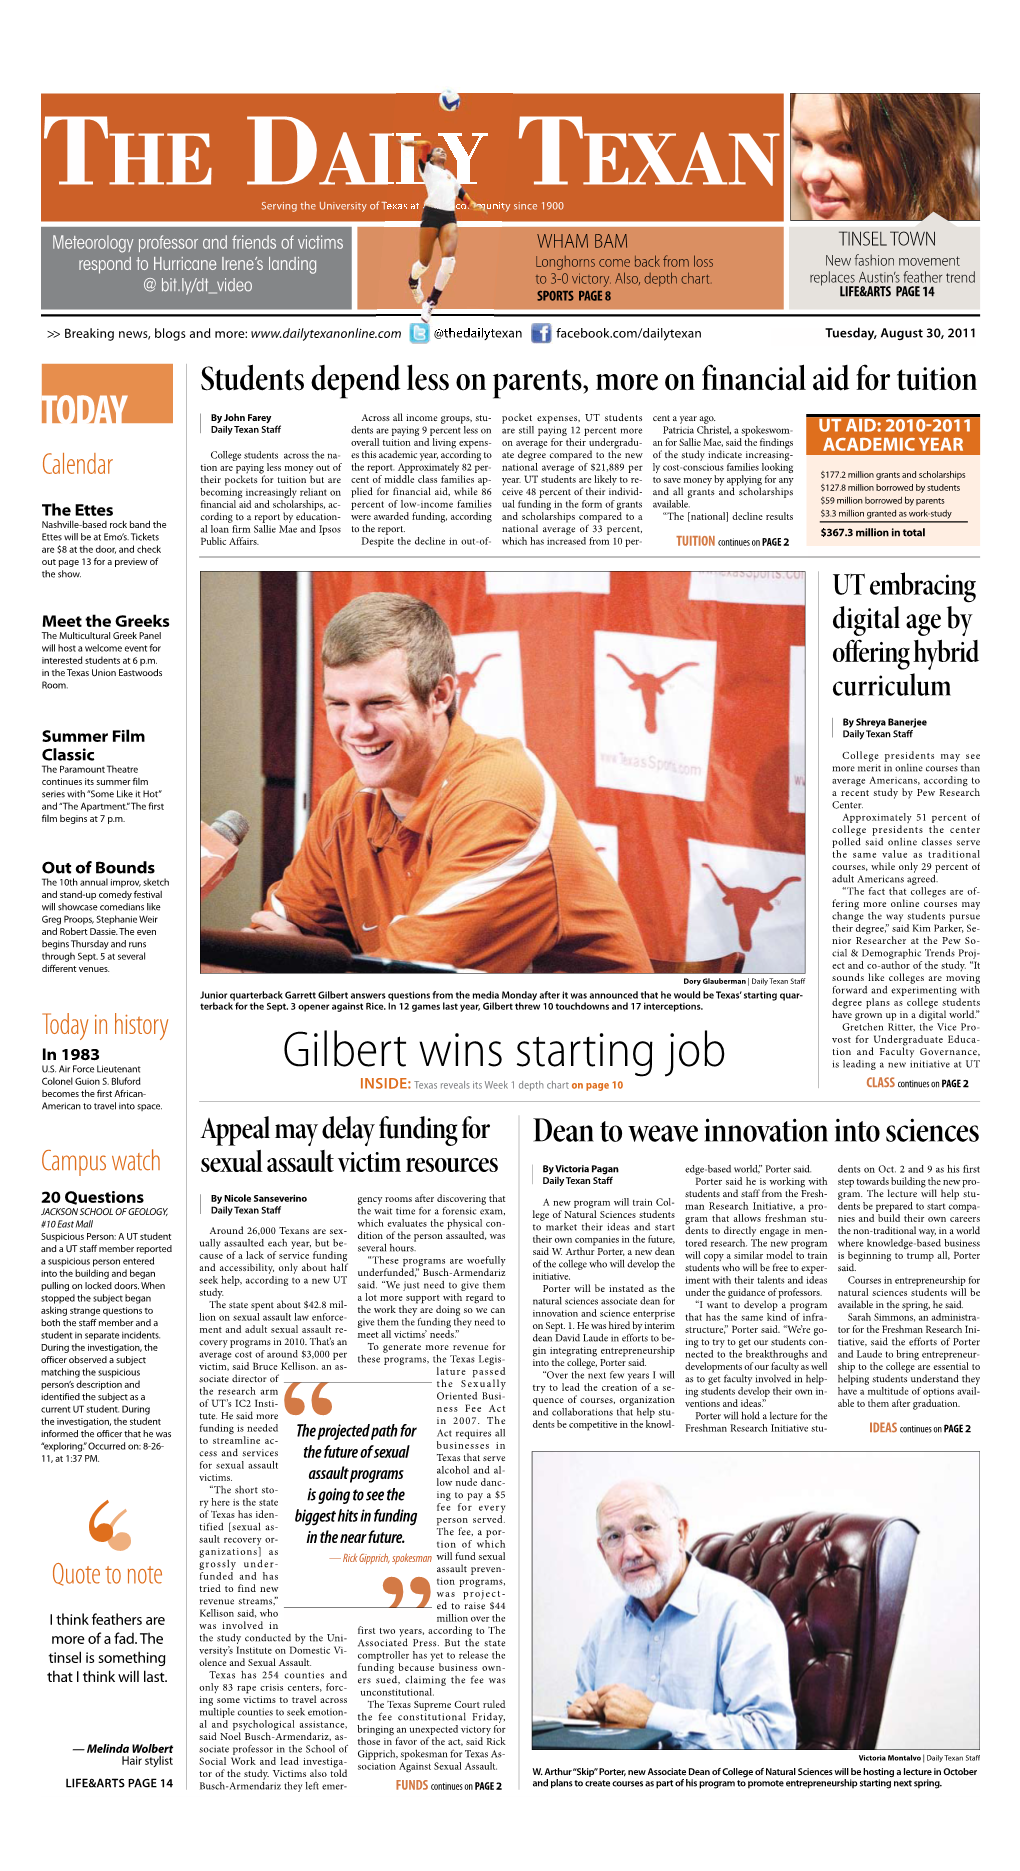 Gilbert Wins Starting Job Is Leading a New Initiative at UT Colonel Guion S